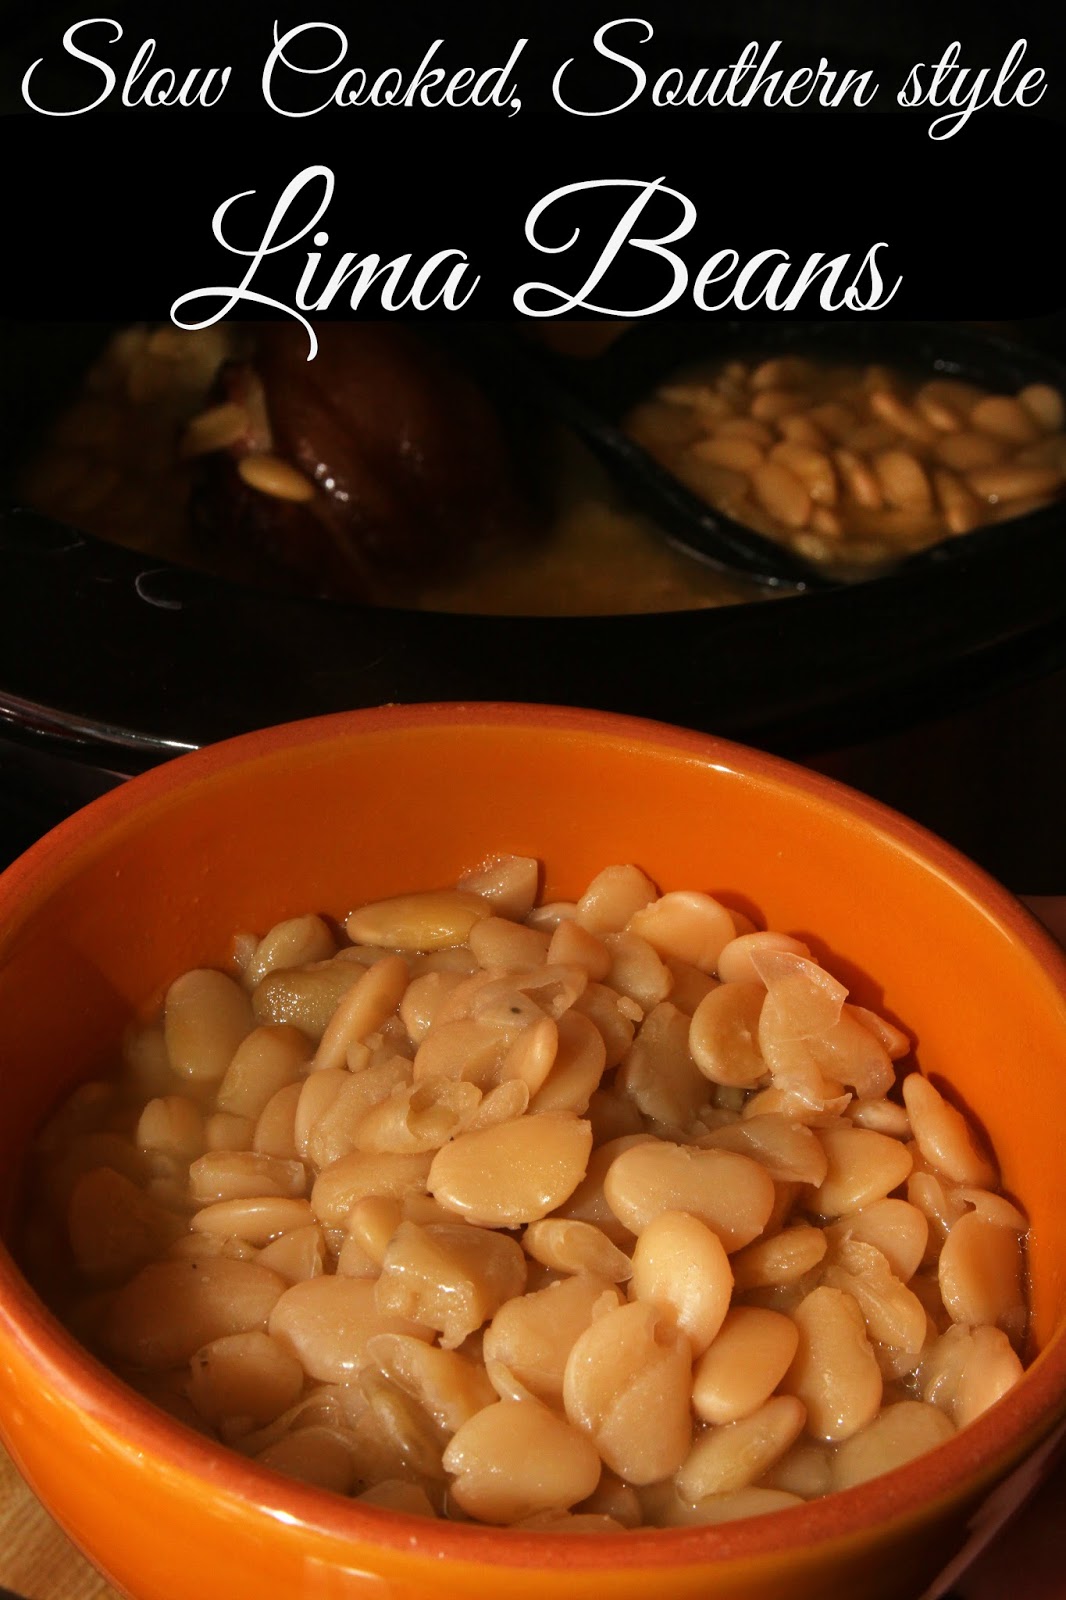 Daddy's Slow Cooked Southern Lima Beans - For the Love of Food